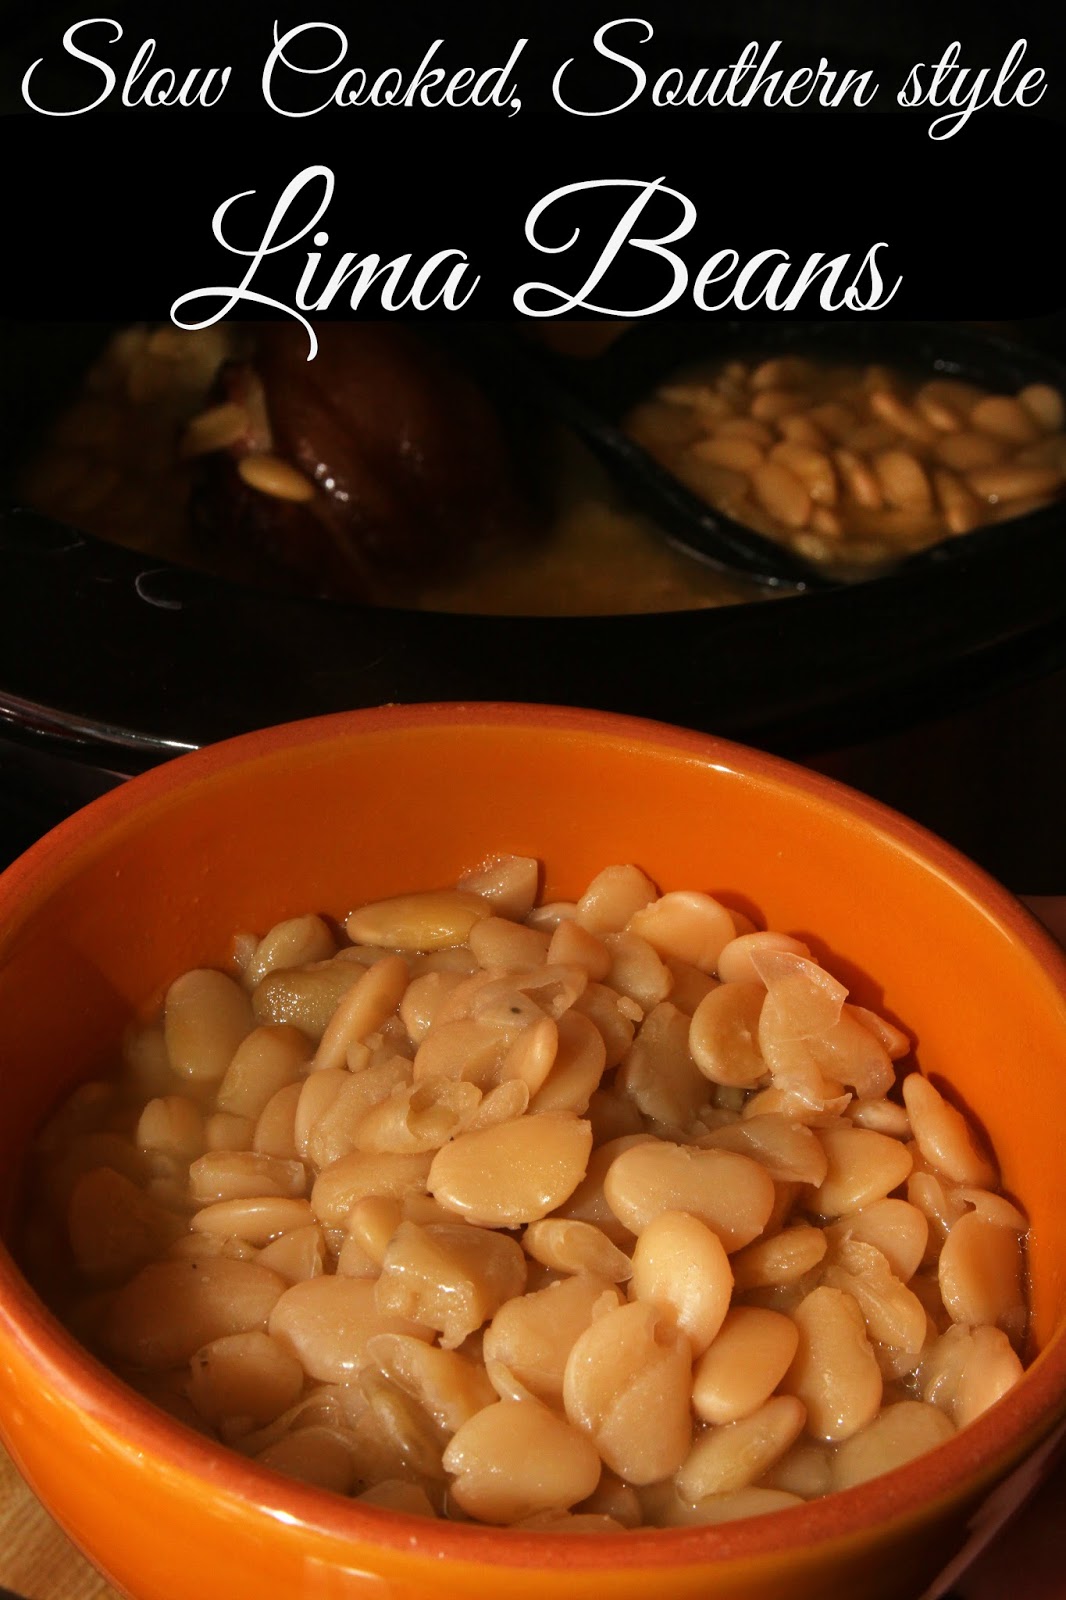 Daddy's Slow Cooked Southern Lima Beans - For the Love of Food